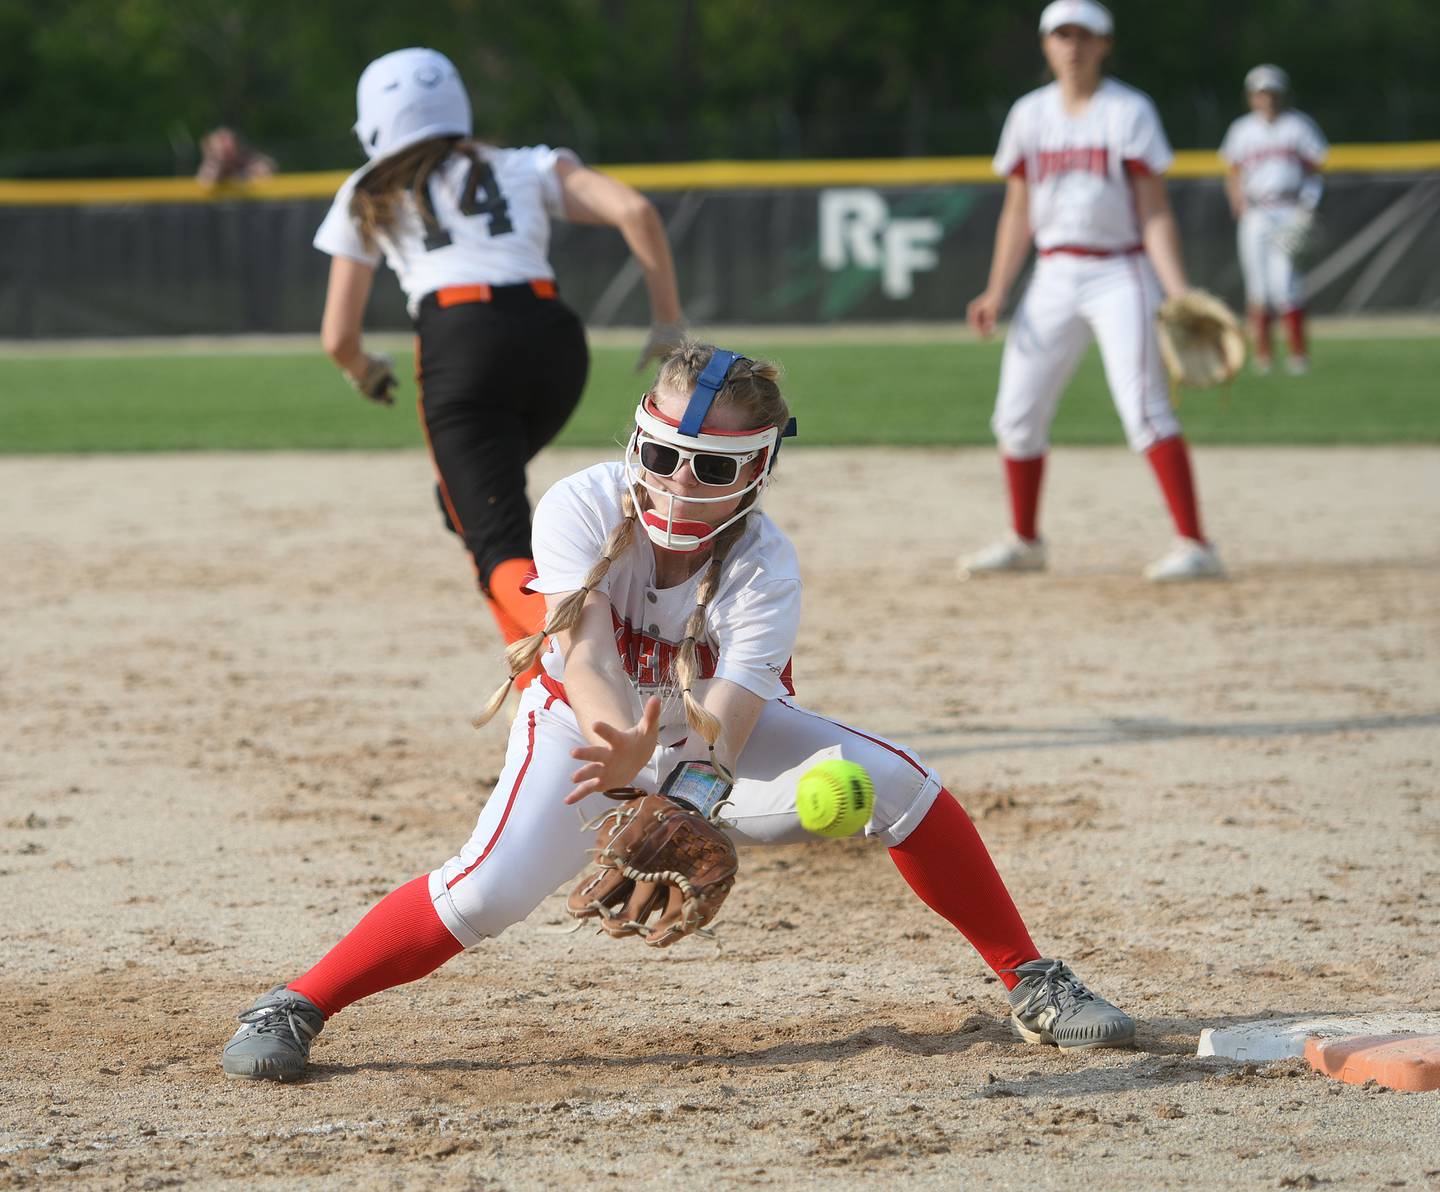 Oregon's Lena Trampel tries to field a low throw to first against Byron at the 1A Rock Falls Regional on Wednesday, May 18.